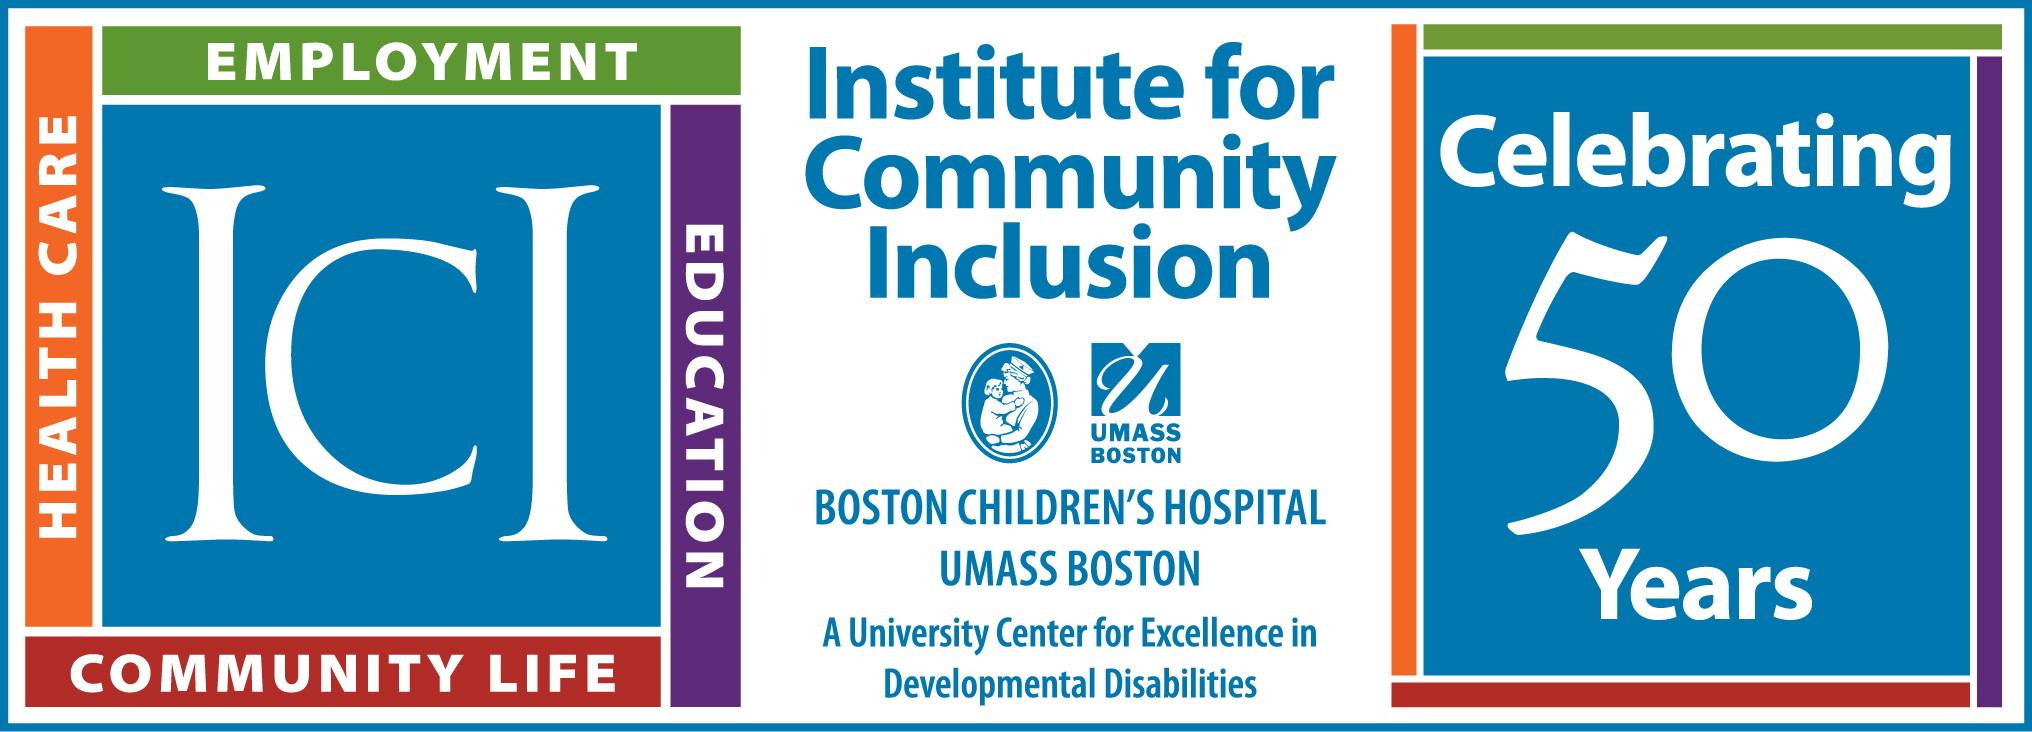 Institute for Community Inclusion at UMass Boston